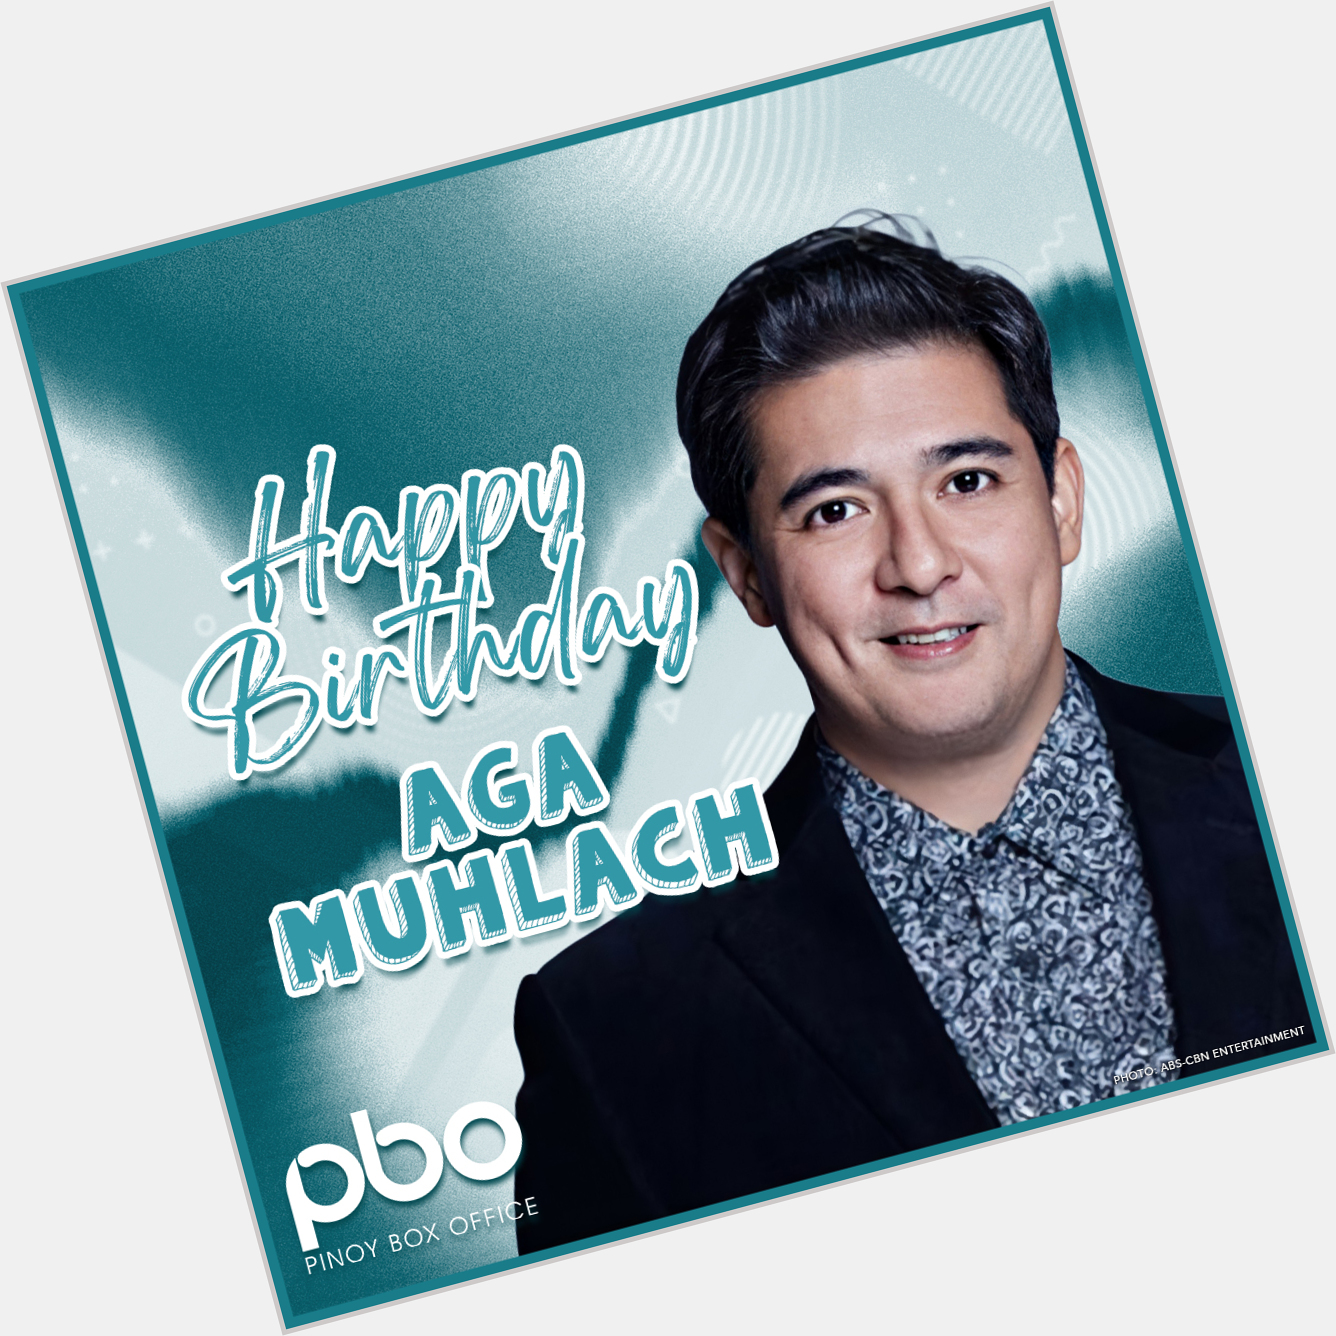 Happy birthday, Aga Muhlach! May your special day be amazing, wonderful, and unforgettable as you are! 